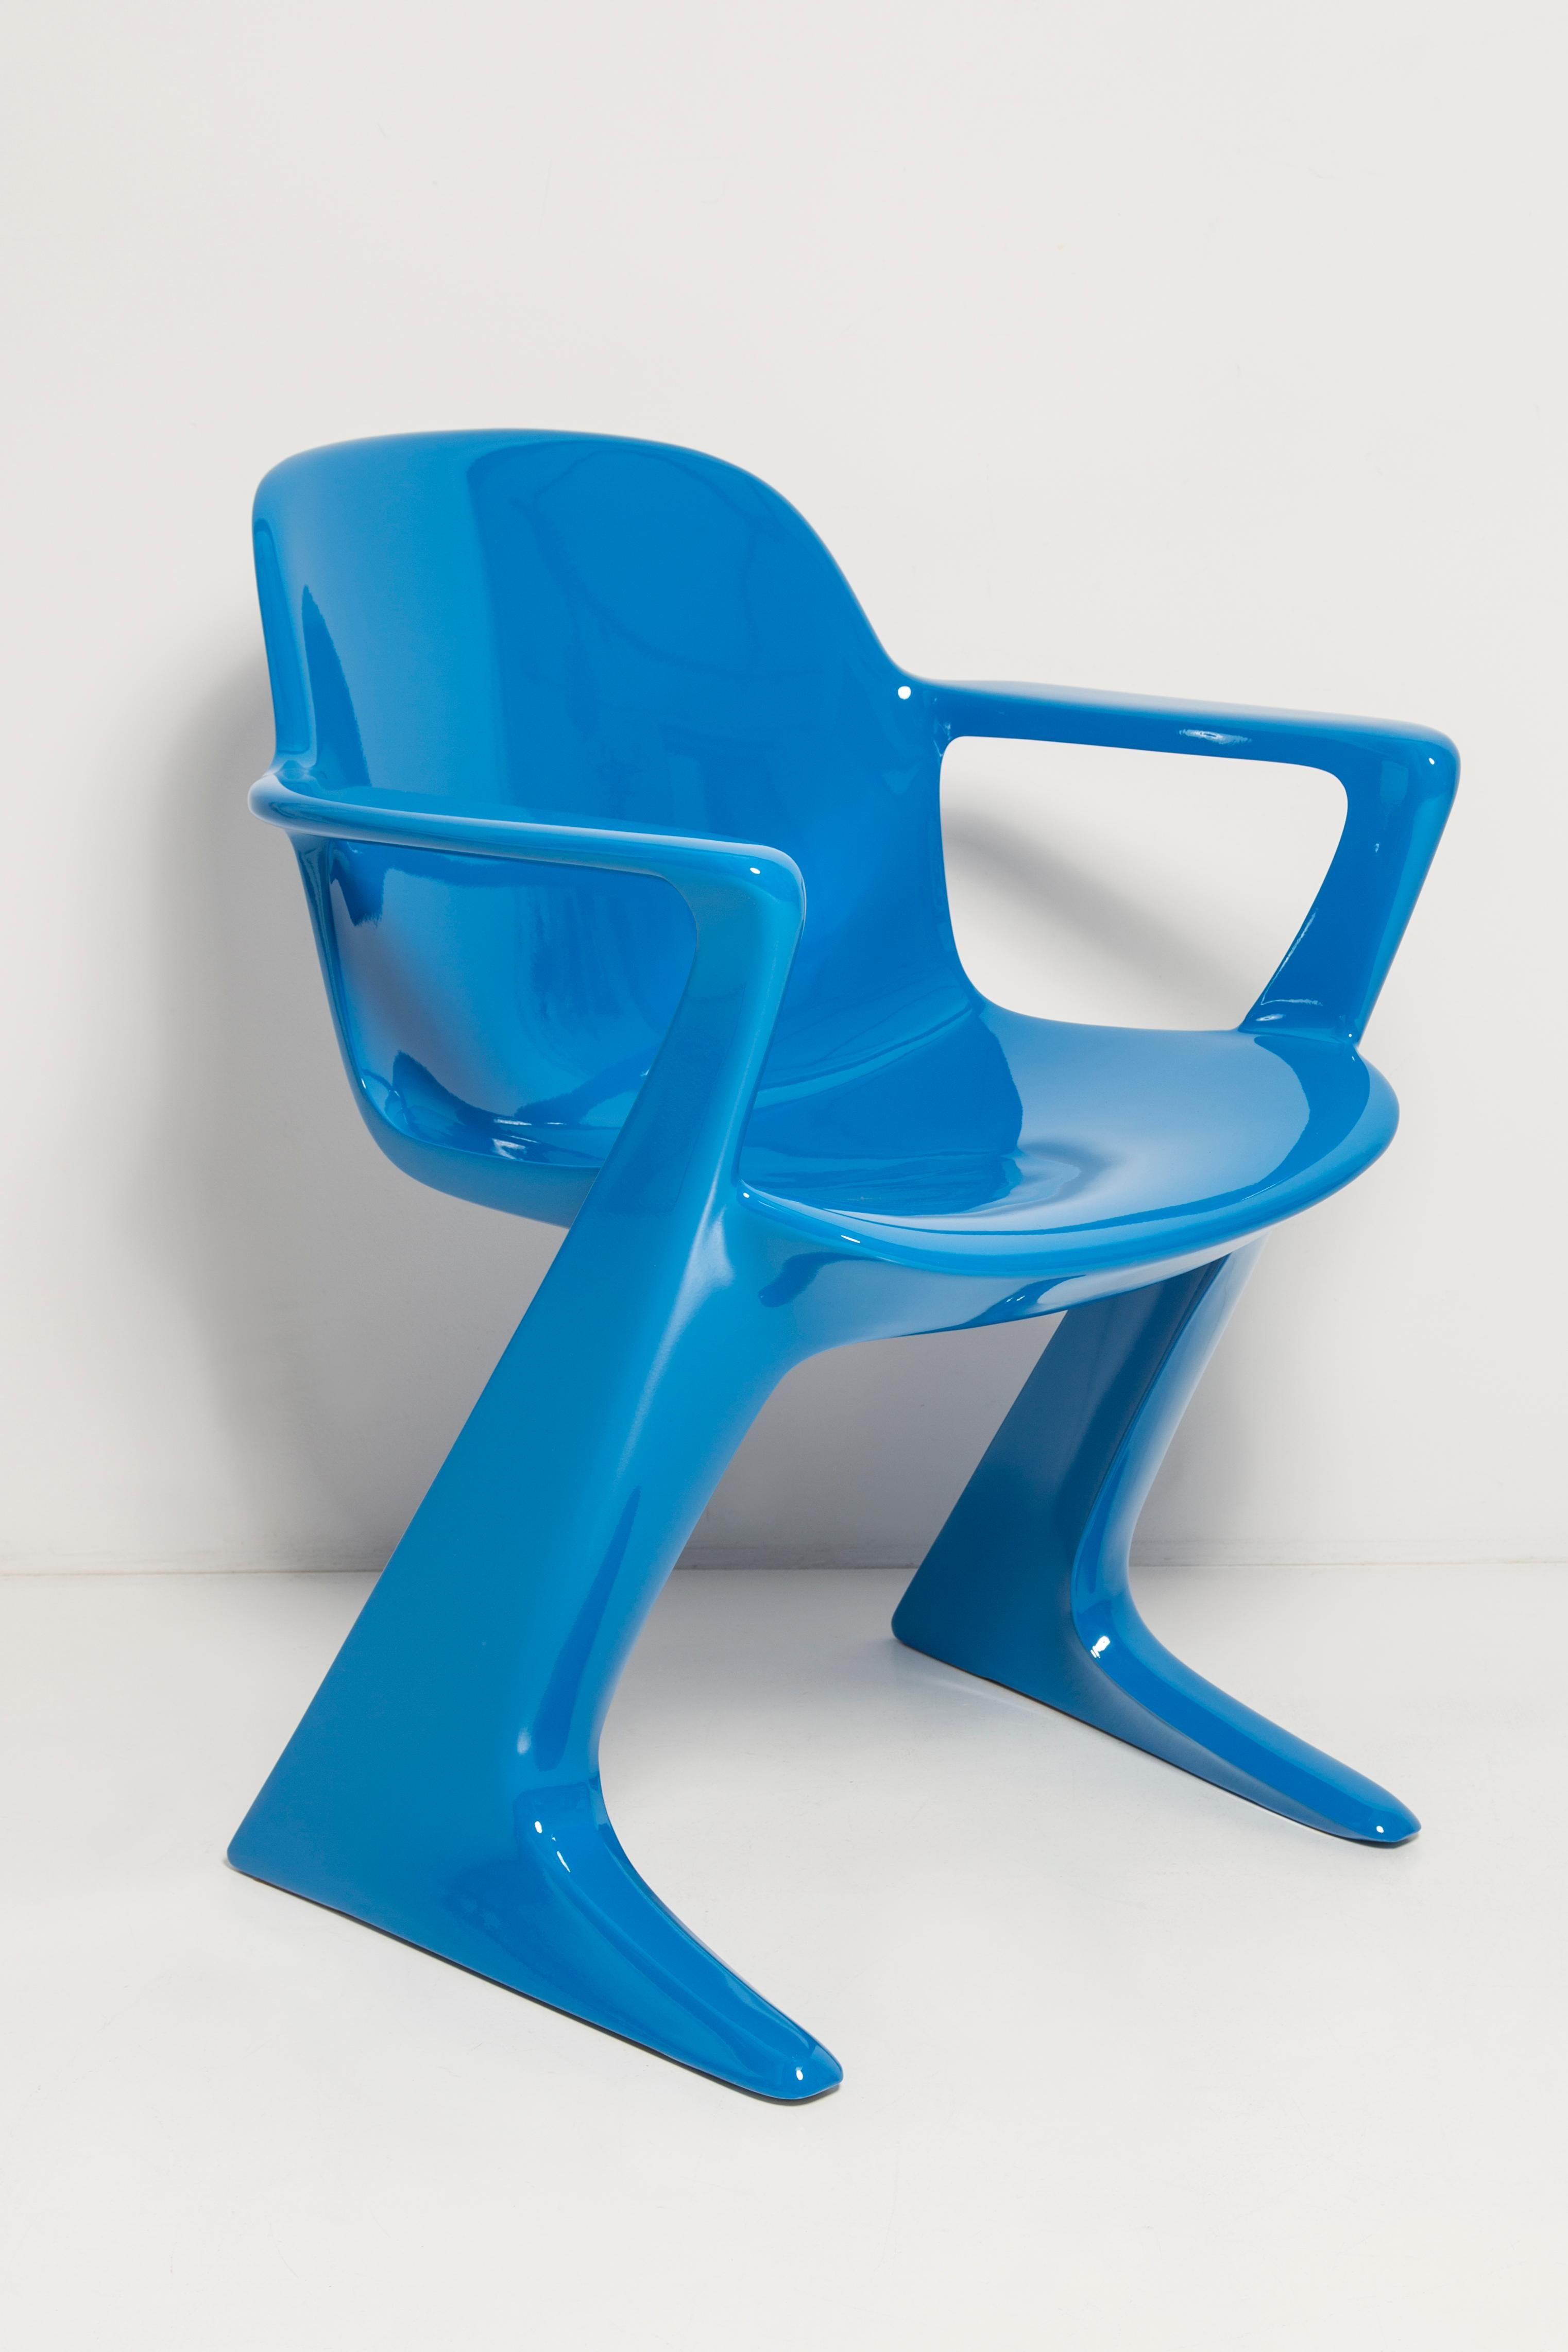 The z.stuhl chair, designed by Ernst Moeckl (1931-2013) in the 1970s, is a cantilever chair made of polyurethane, which is available with and without armrests. In the vernacular, the chair is known by its geometry-related names such as 